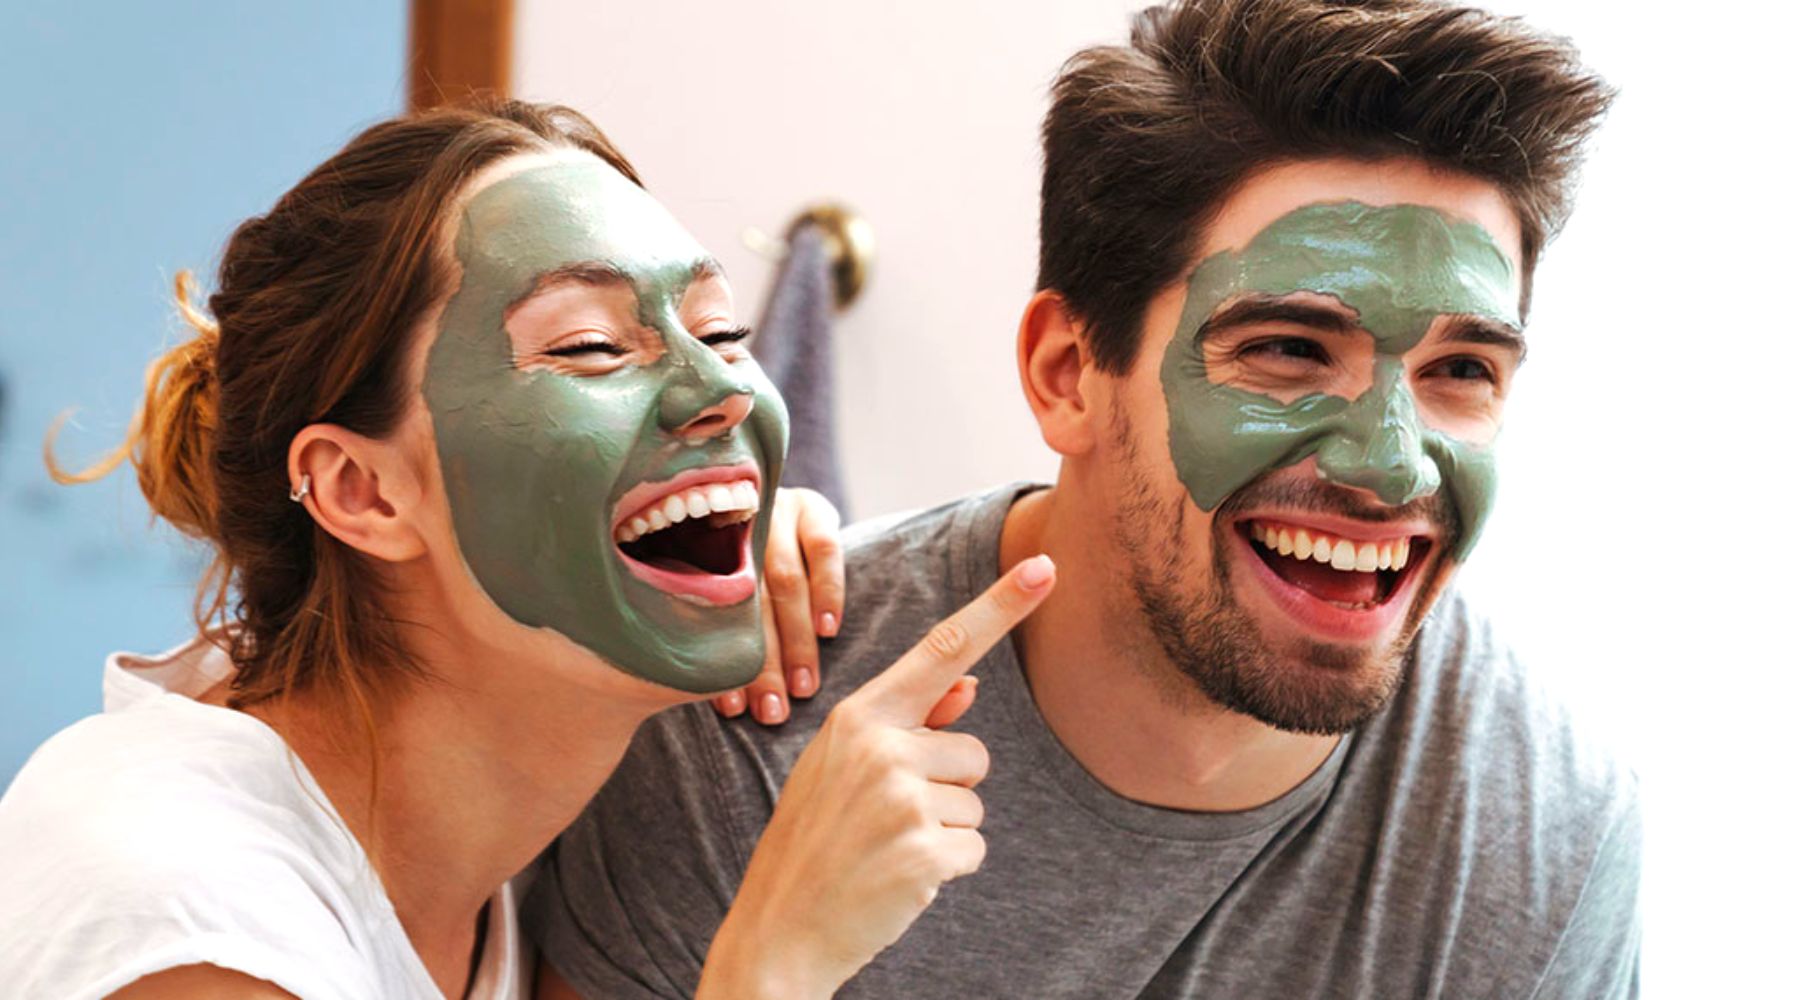 Better Beauty | IMPORTANCE OF COUPLE SKINCARE ROUTINE A Fun & Intimate Activity For Couples